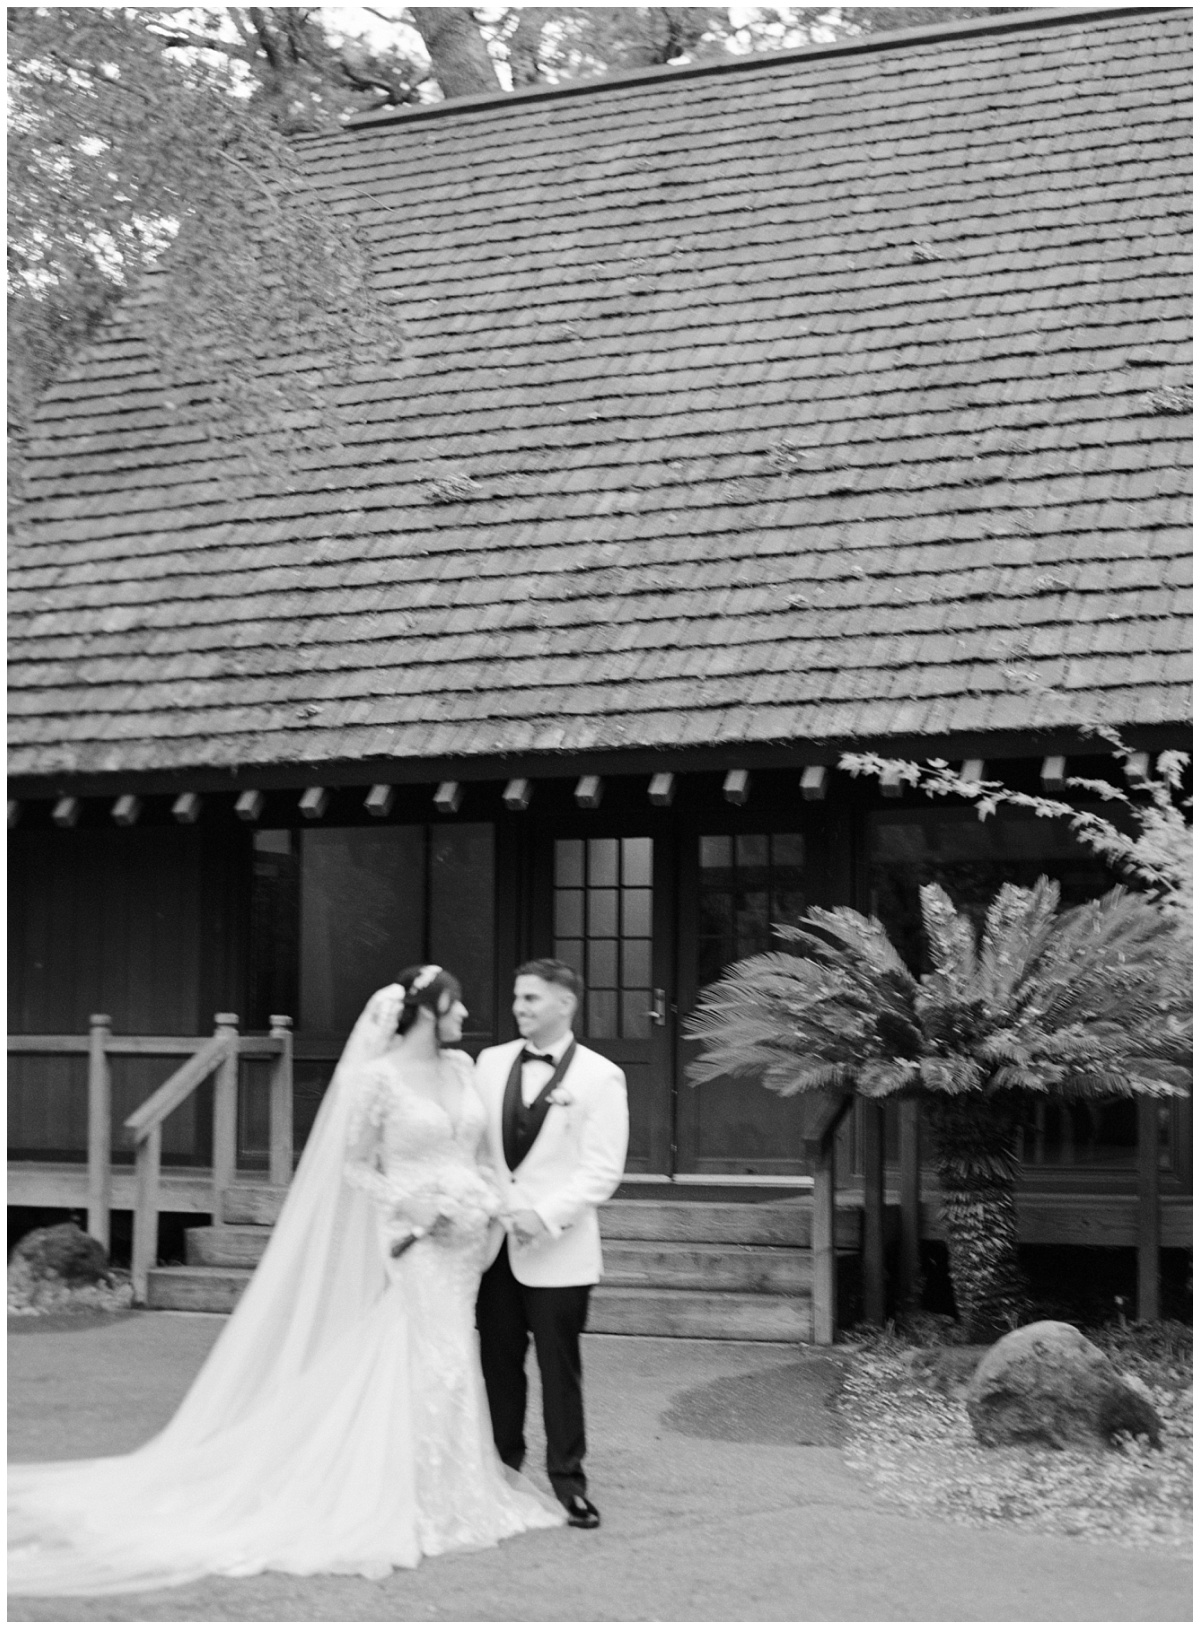 Authentic Wedding Portraits at the Japanese Garden